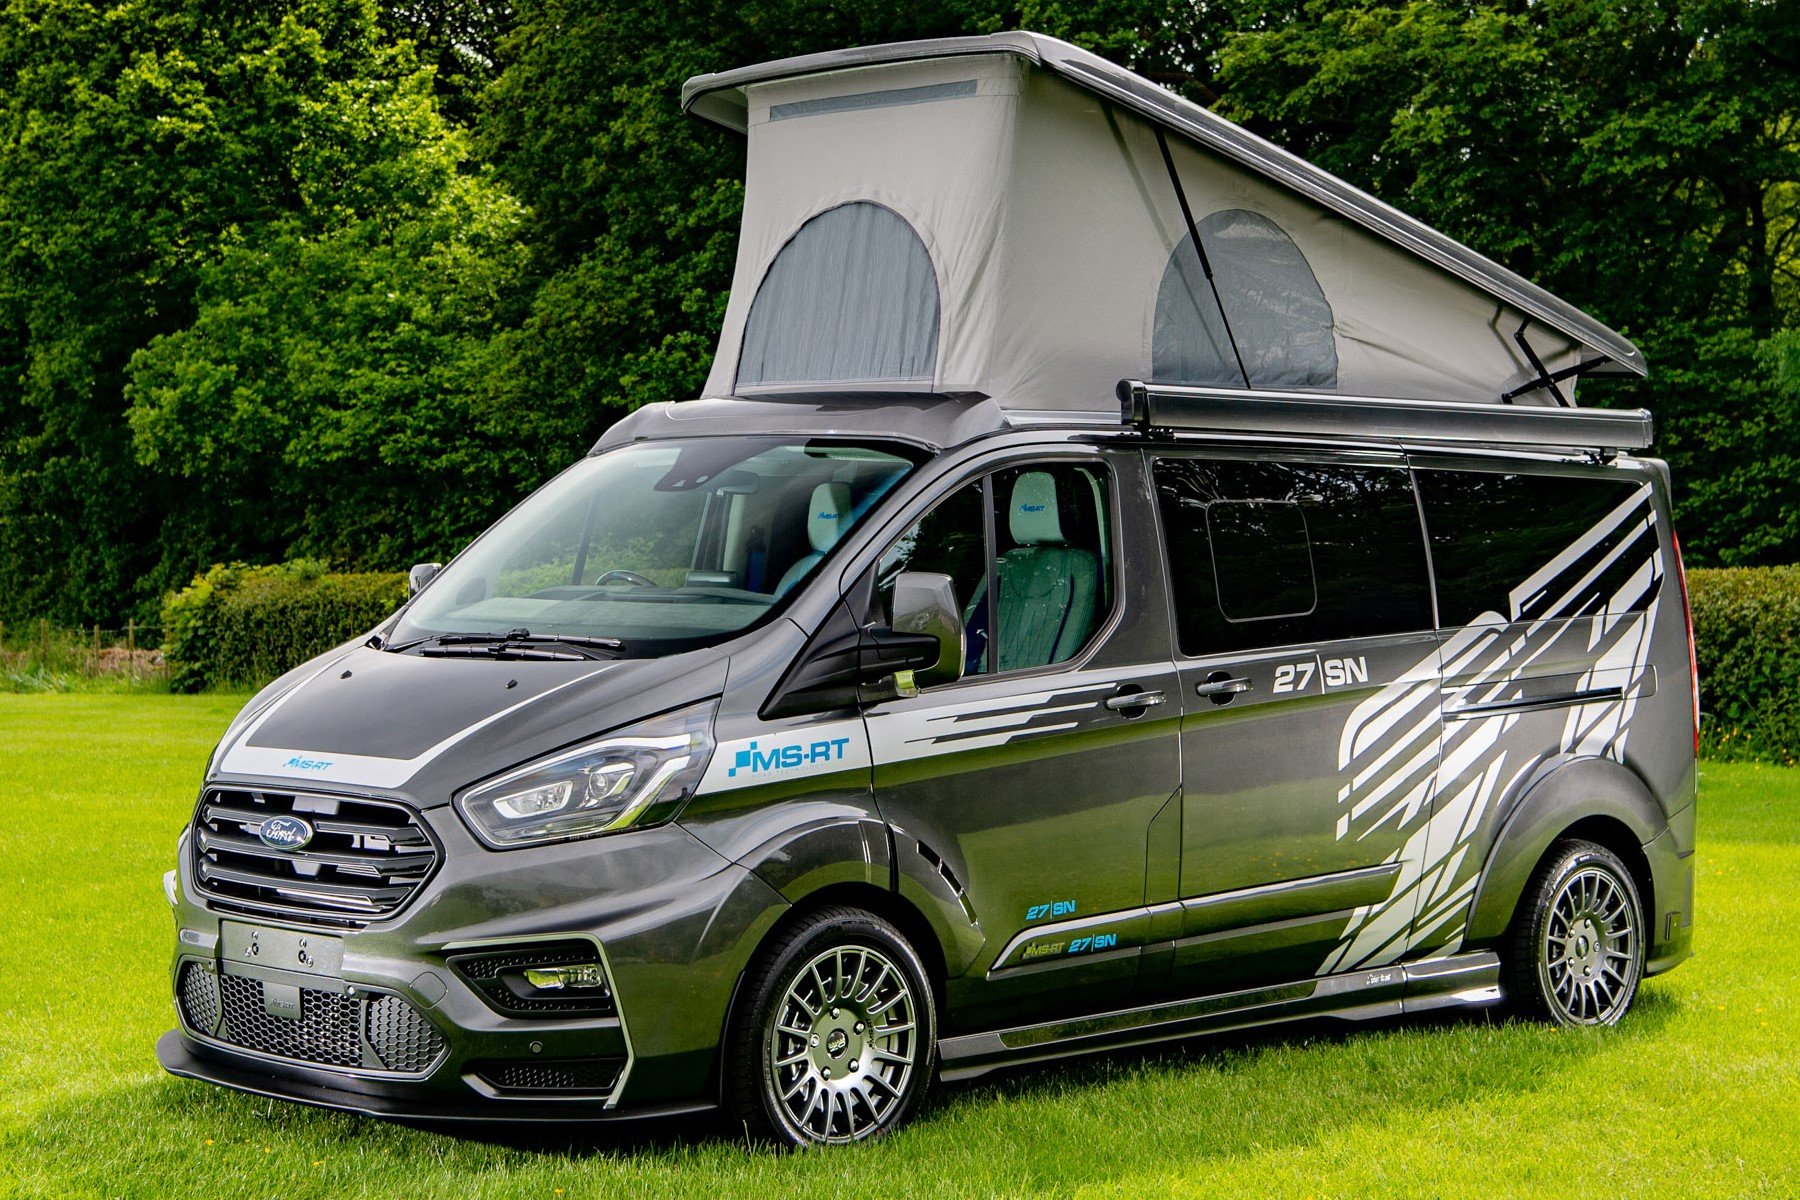 Meet the ‘dream’ £77,000 Ford Transit campervan Read Cars